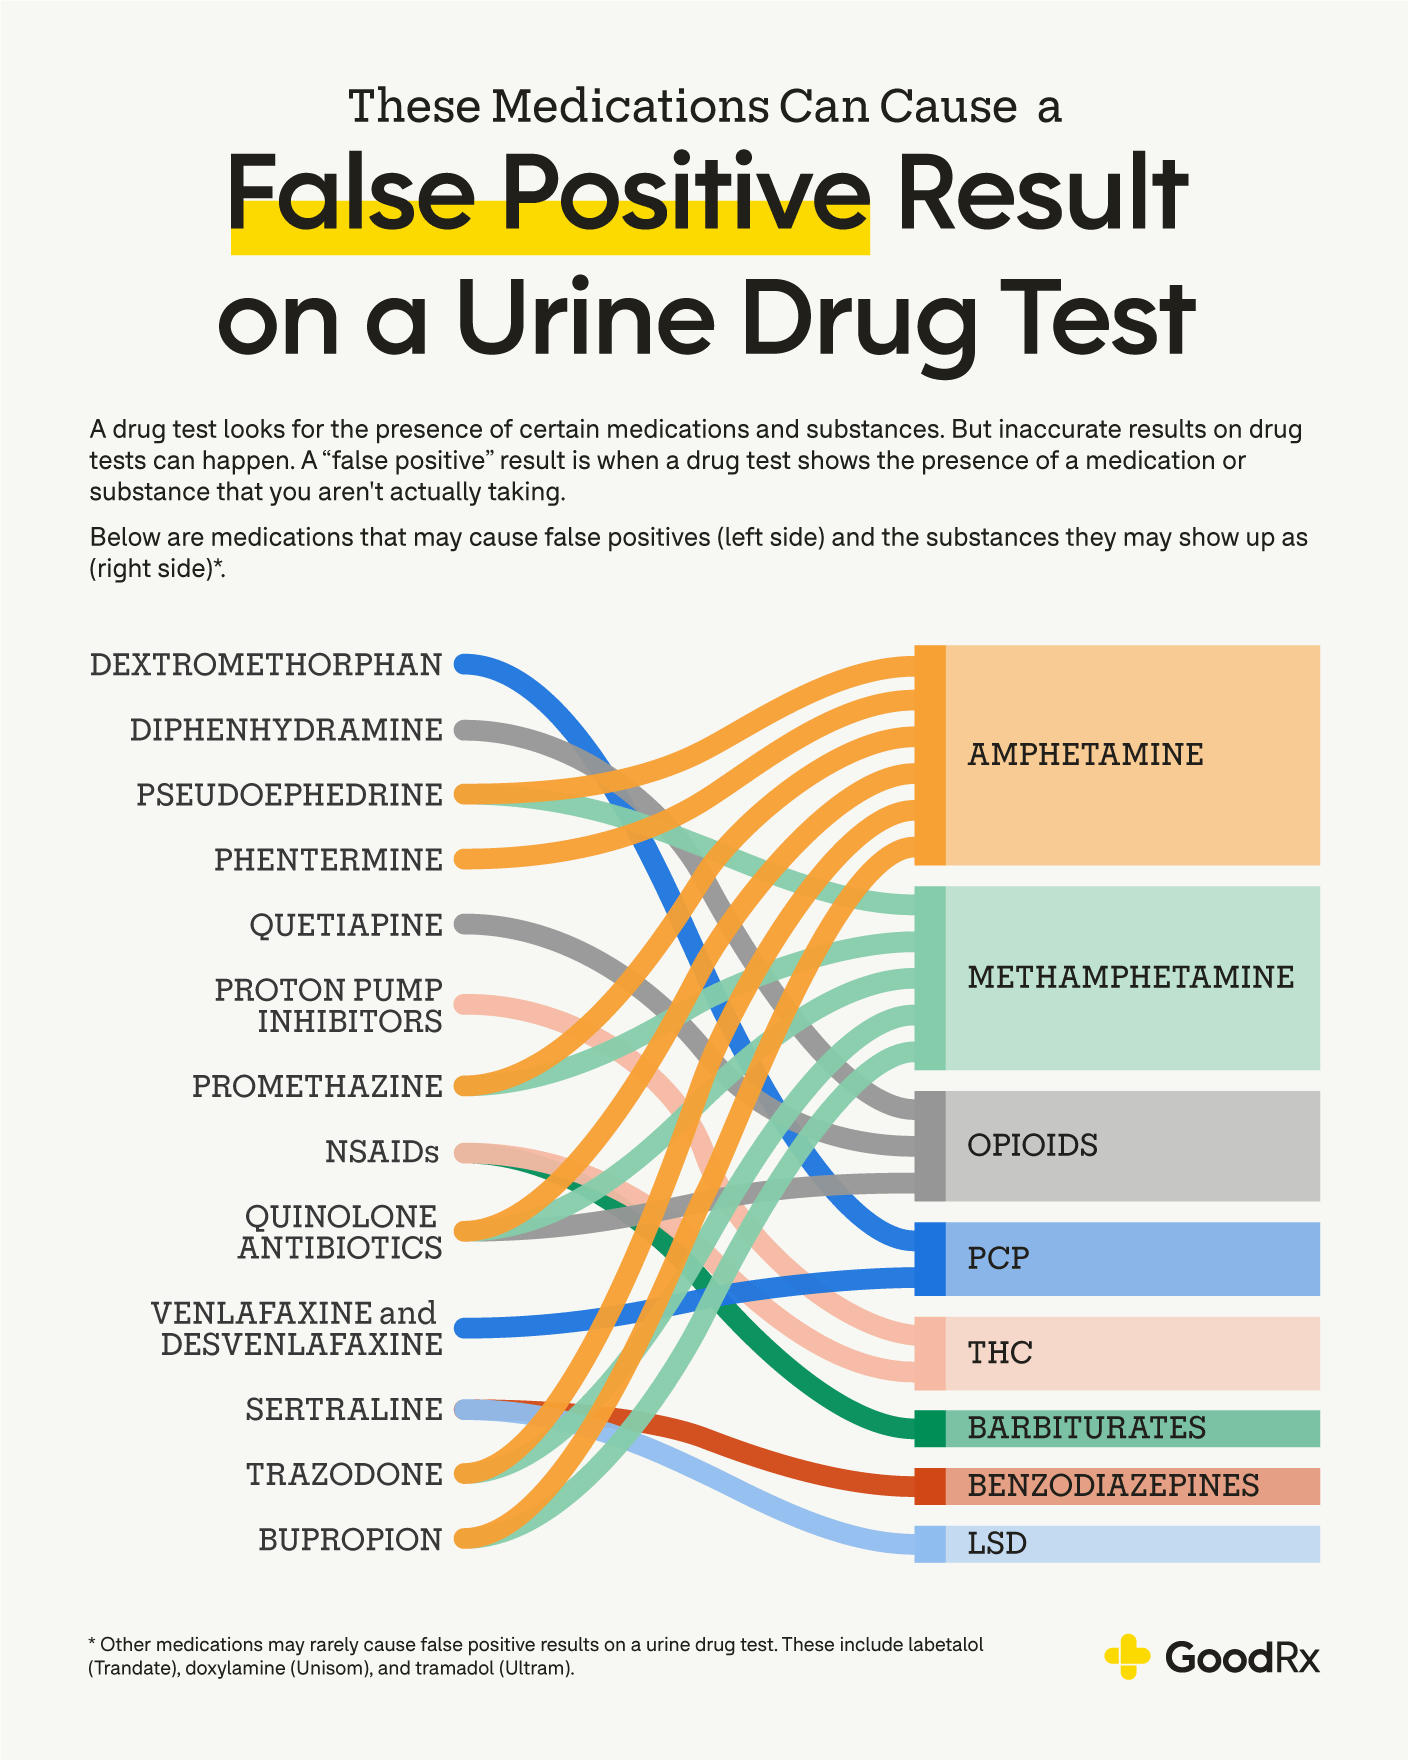 Does Adderall Show Up in Drug Test?